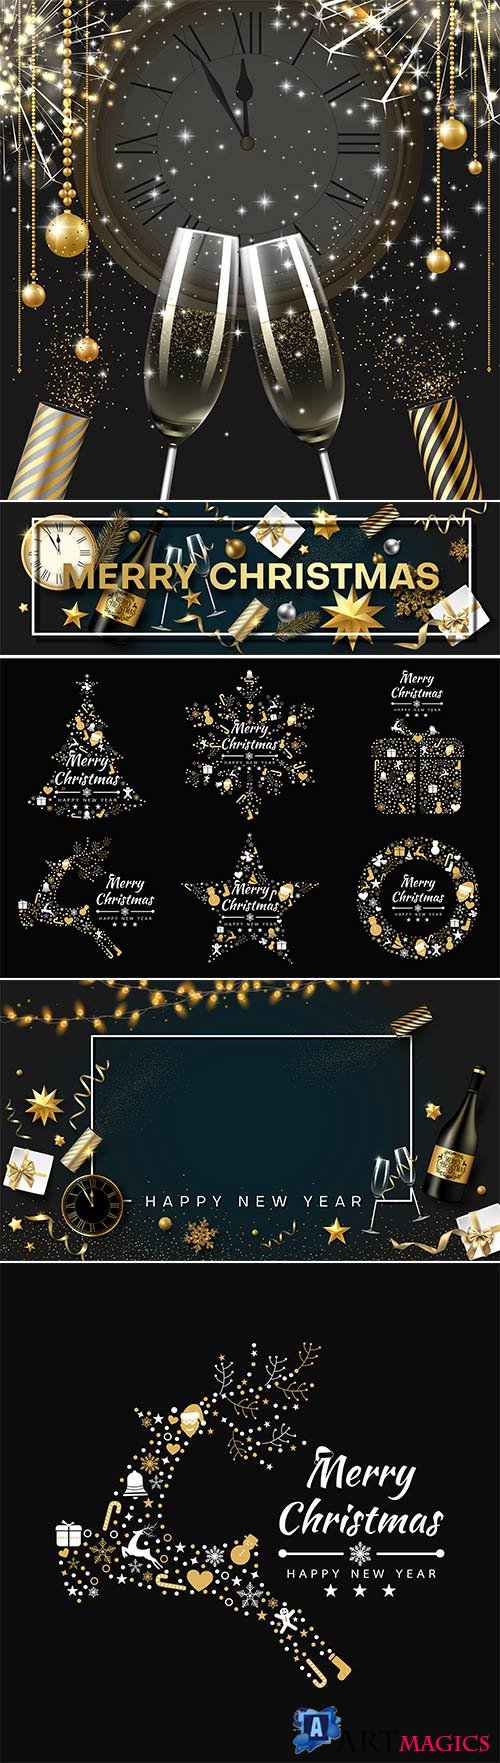 Christmas and New Year vector card with golden decor